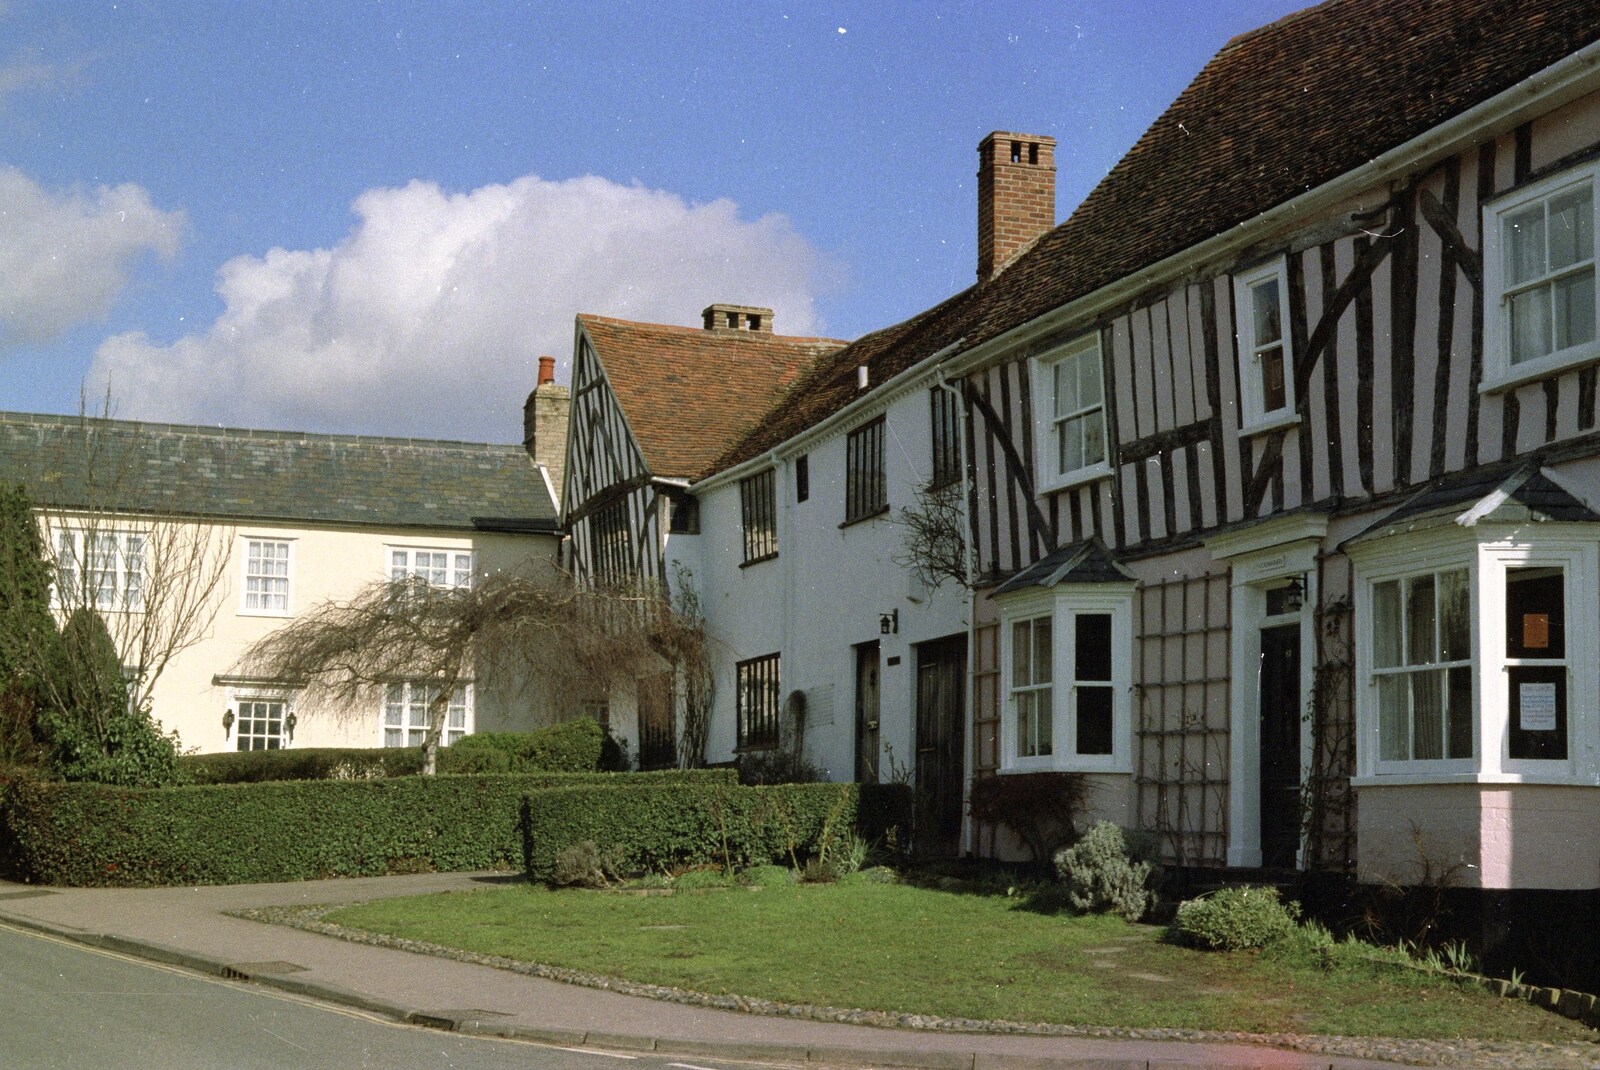 More of Lavenham from Mother and Mike Visit, Lavenham, Suffolk - 14th April 1996